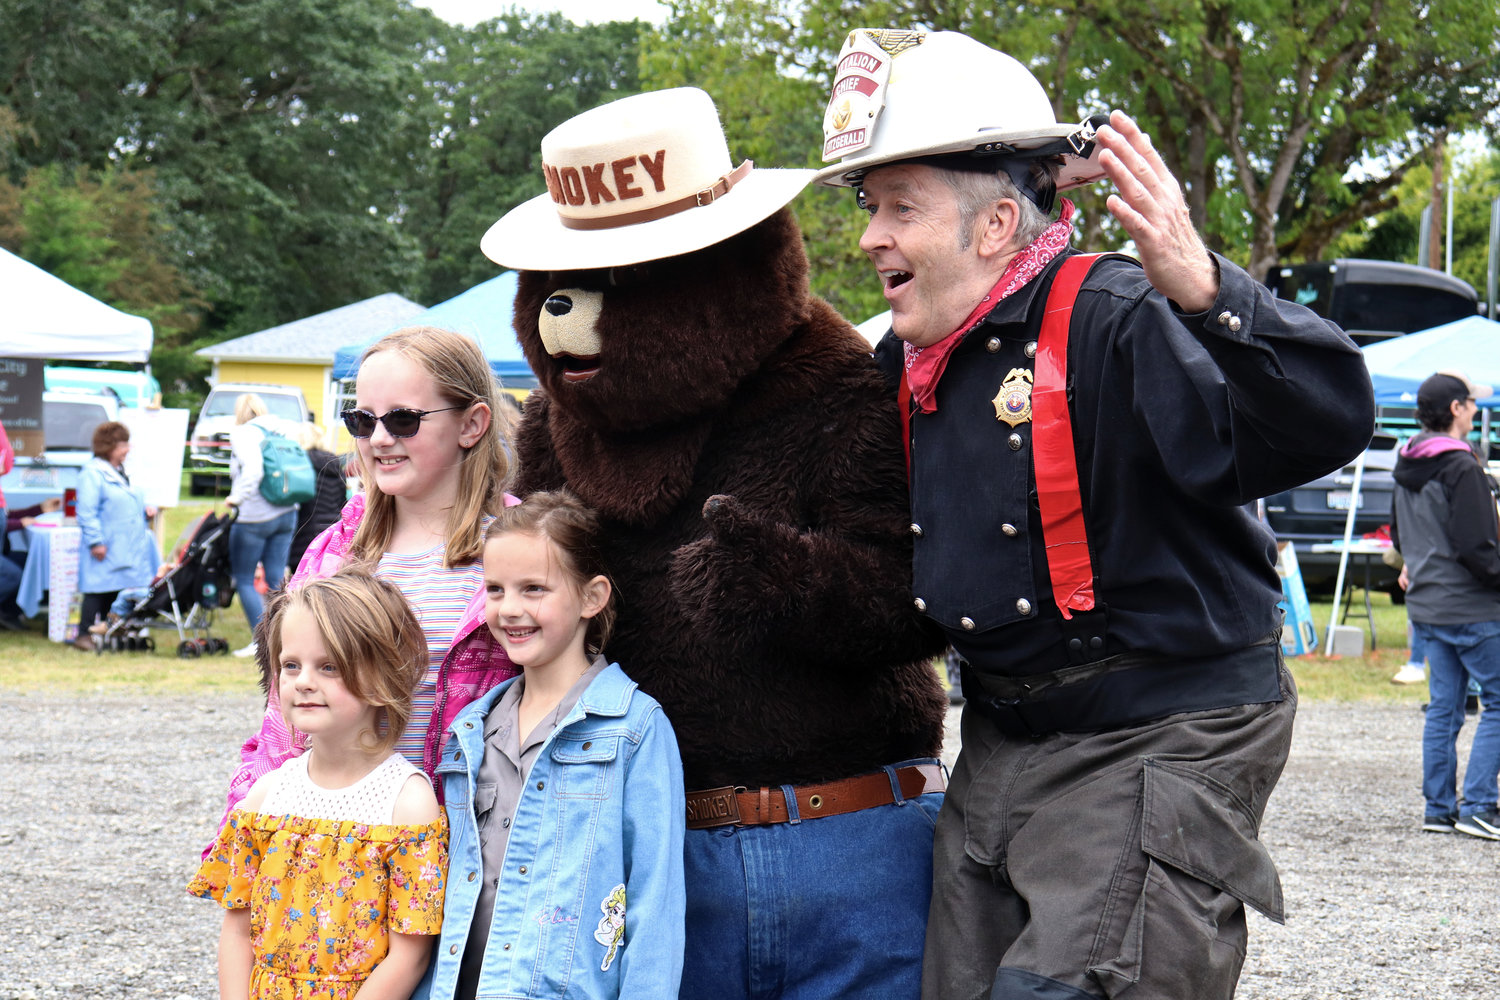 Smokey the Bear and Tom Fitzgerald, a battalion chief for West Thurston Regional Fire Authority, pose for photos with children attending the Swede Day celebration in Rochester on Saturday.